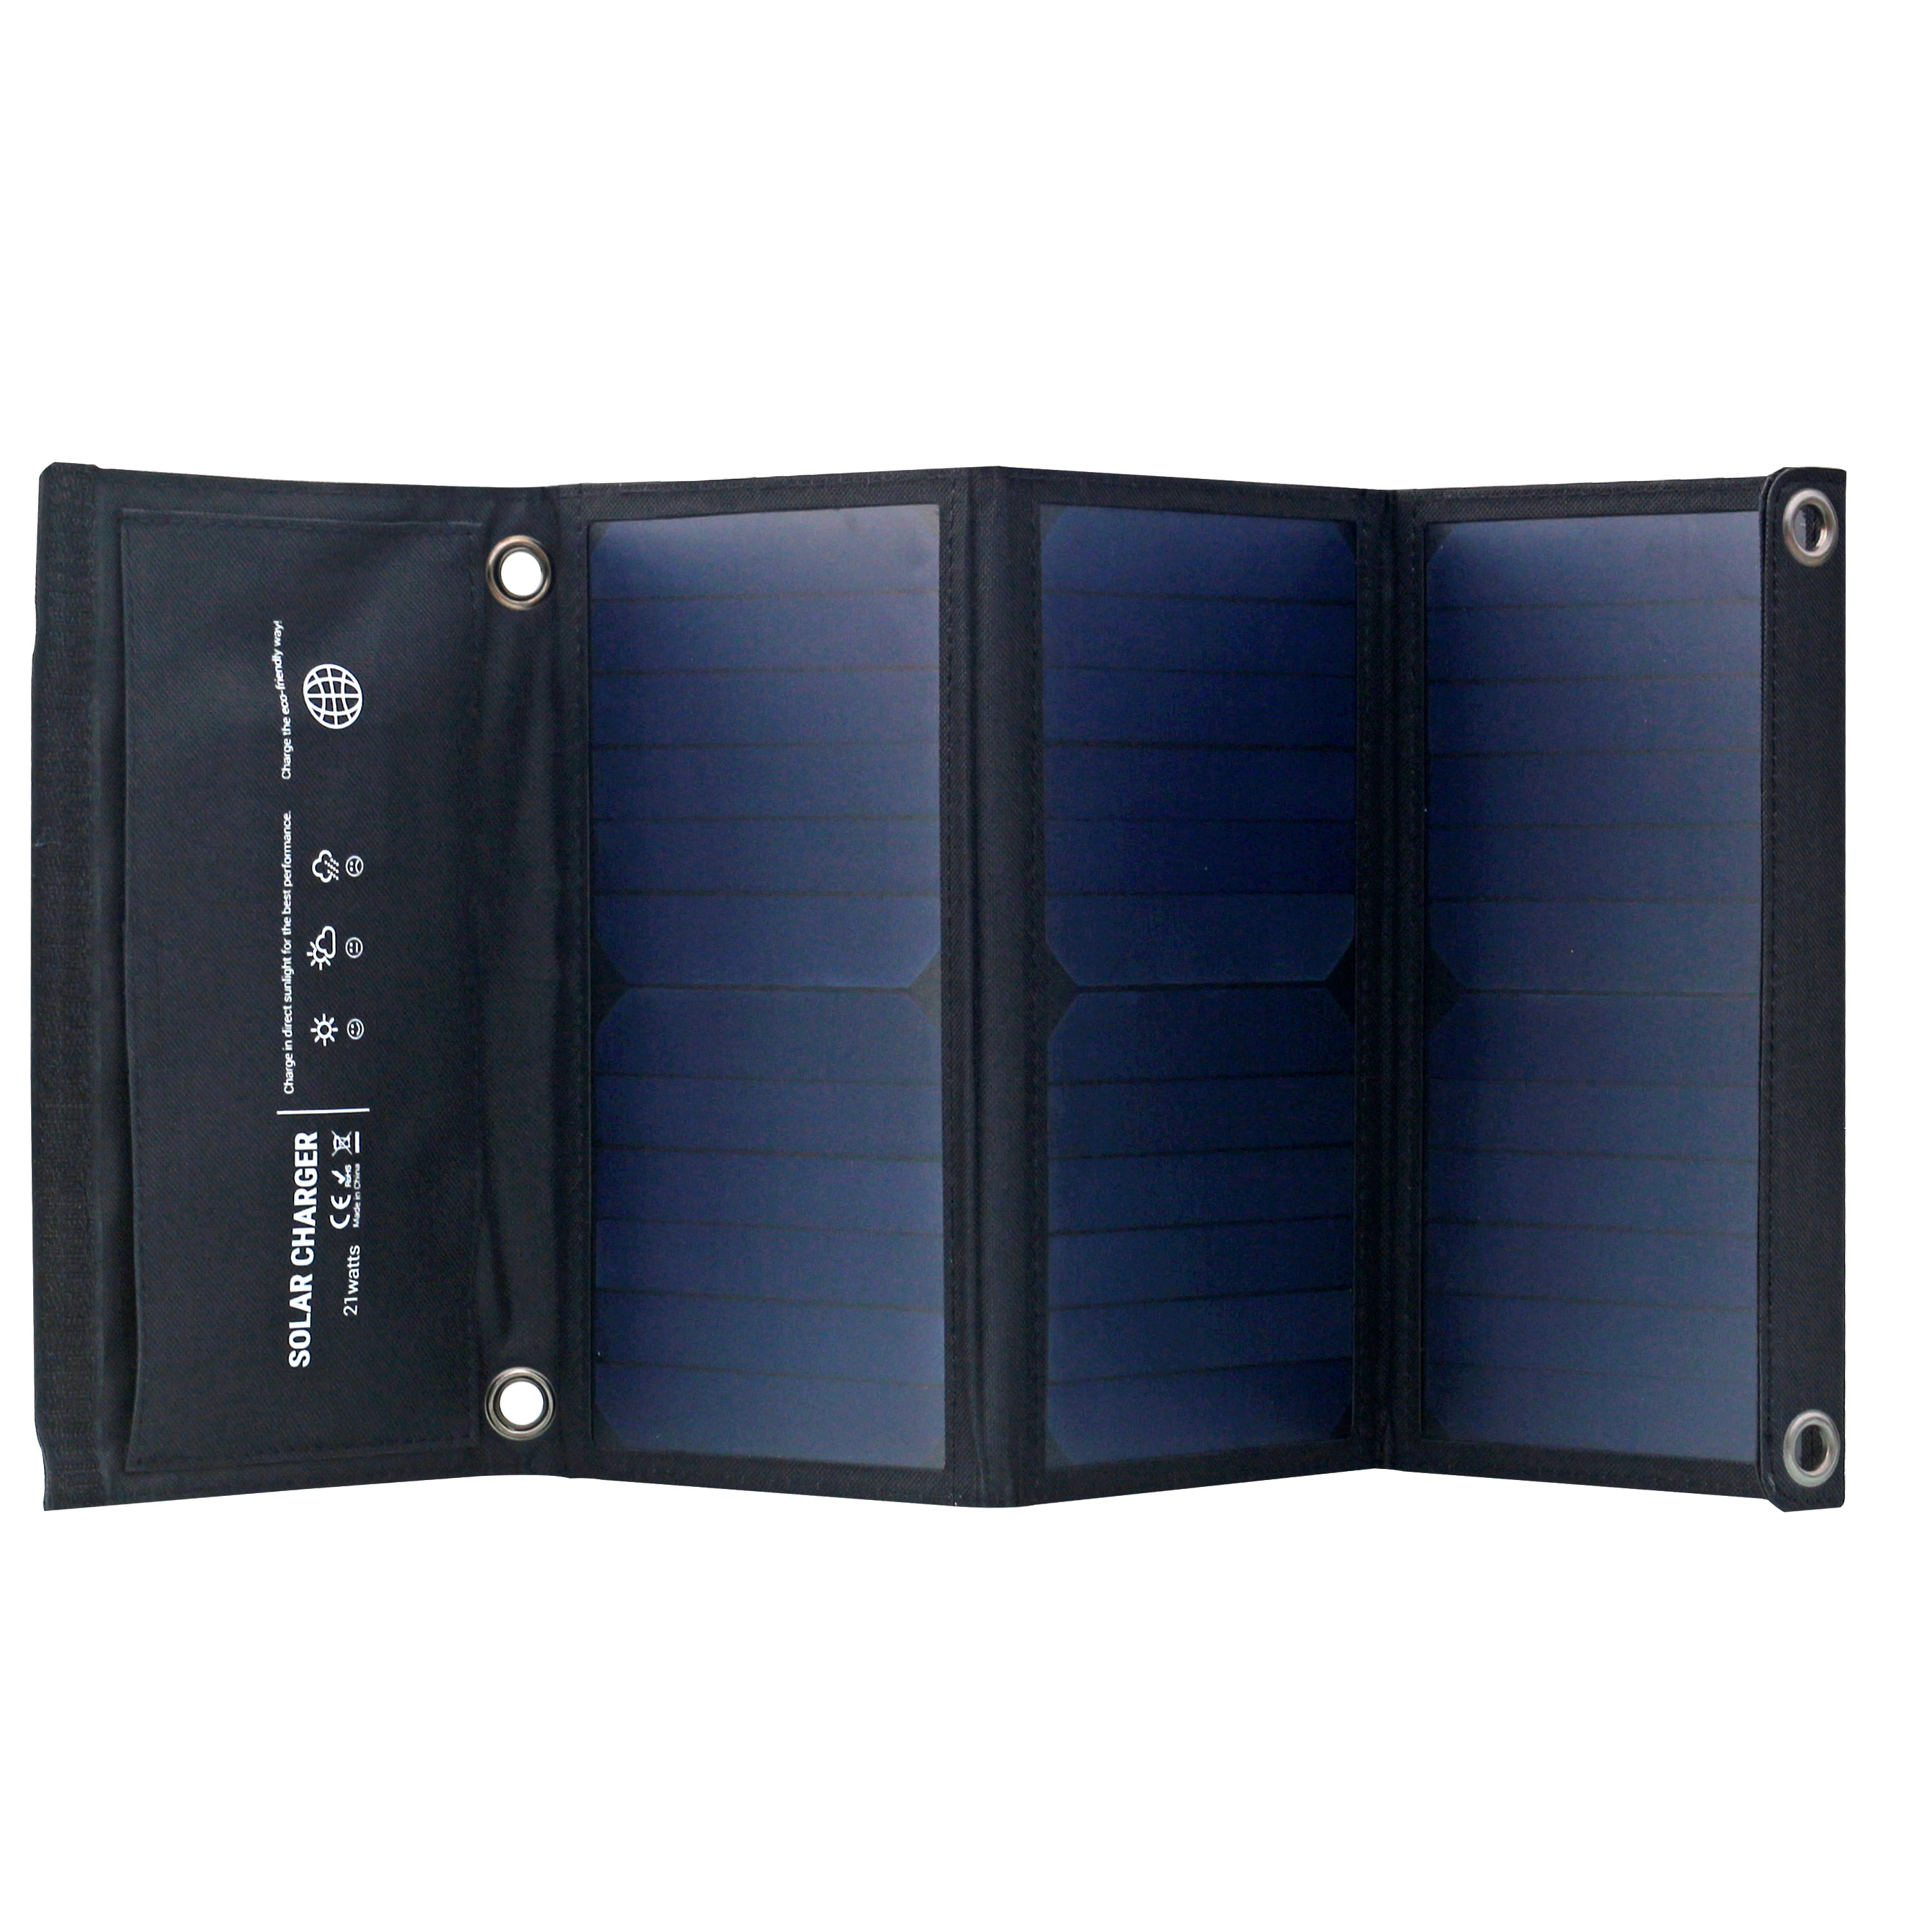 Good Quality Foldable Solar Charger – OEM wholesales  efficiently 21w sun-power foldable solar panel charger 5V2A solar charger waterproof  – EEON